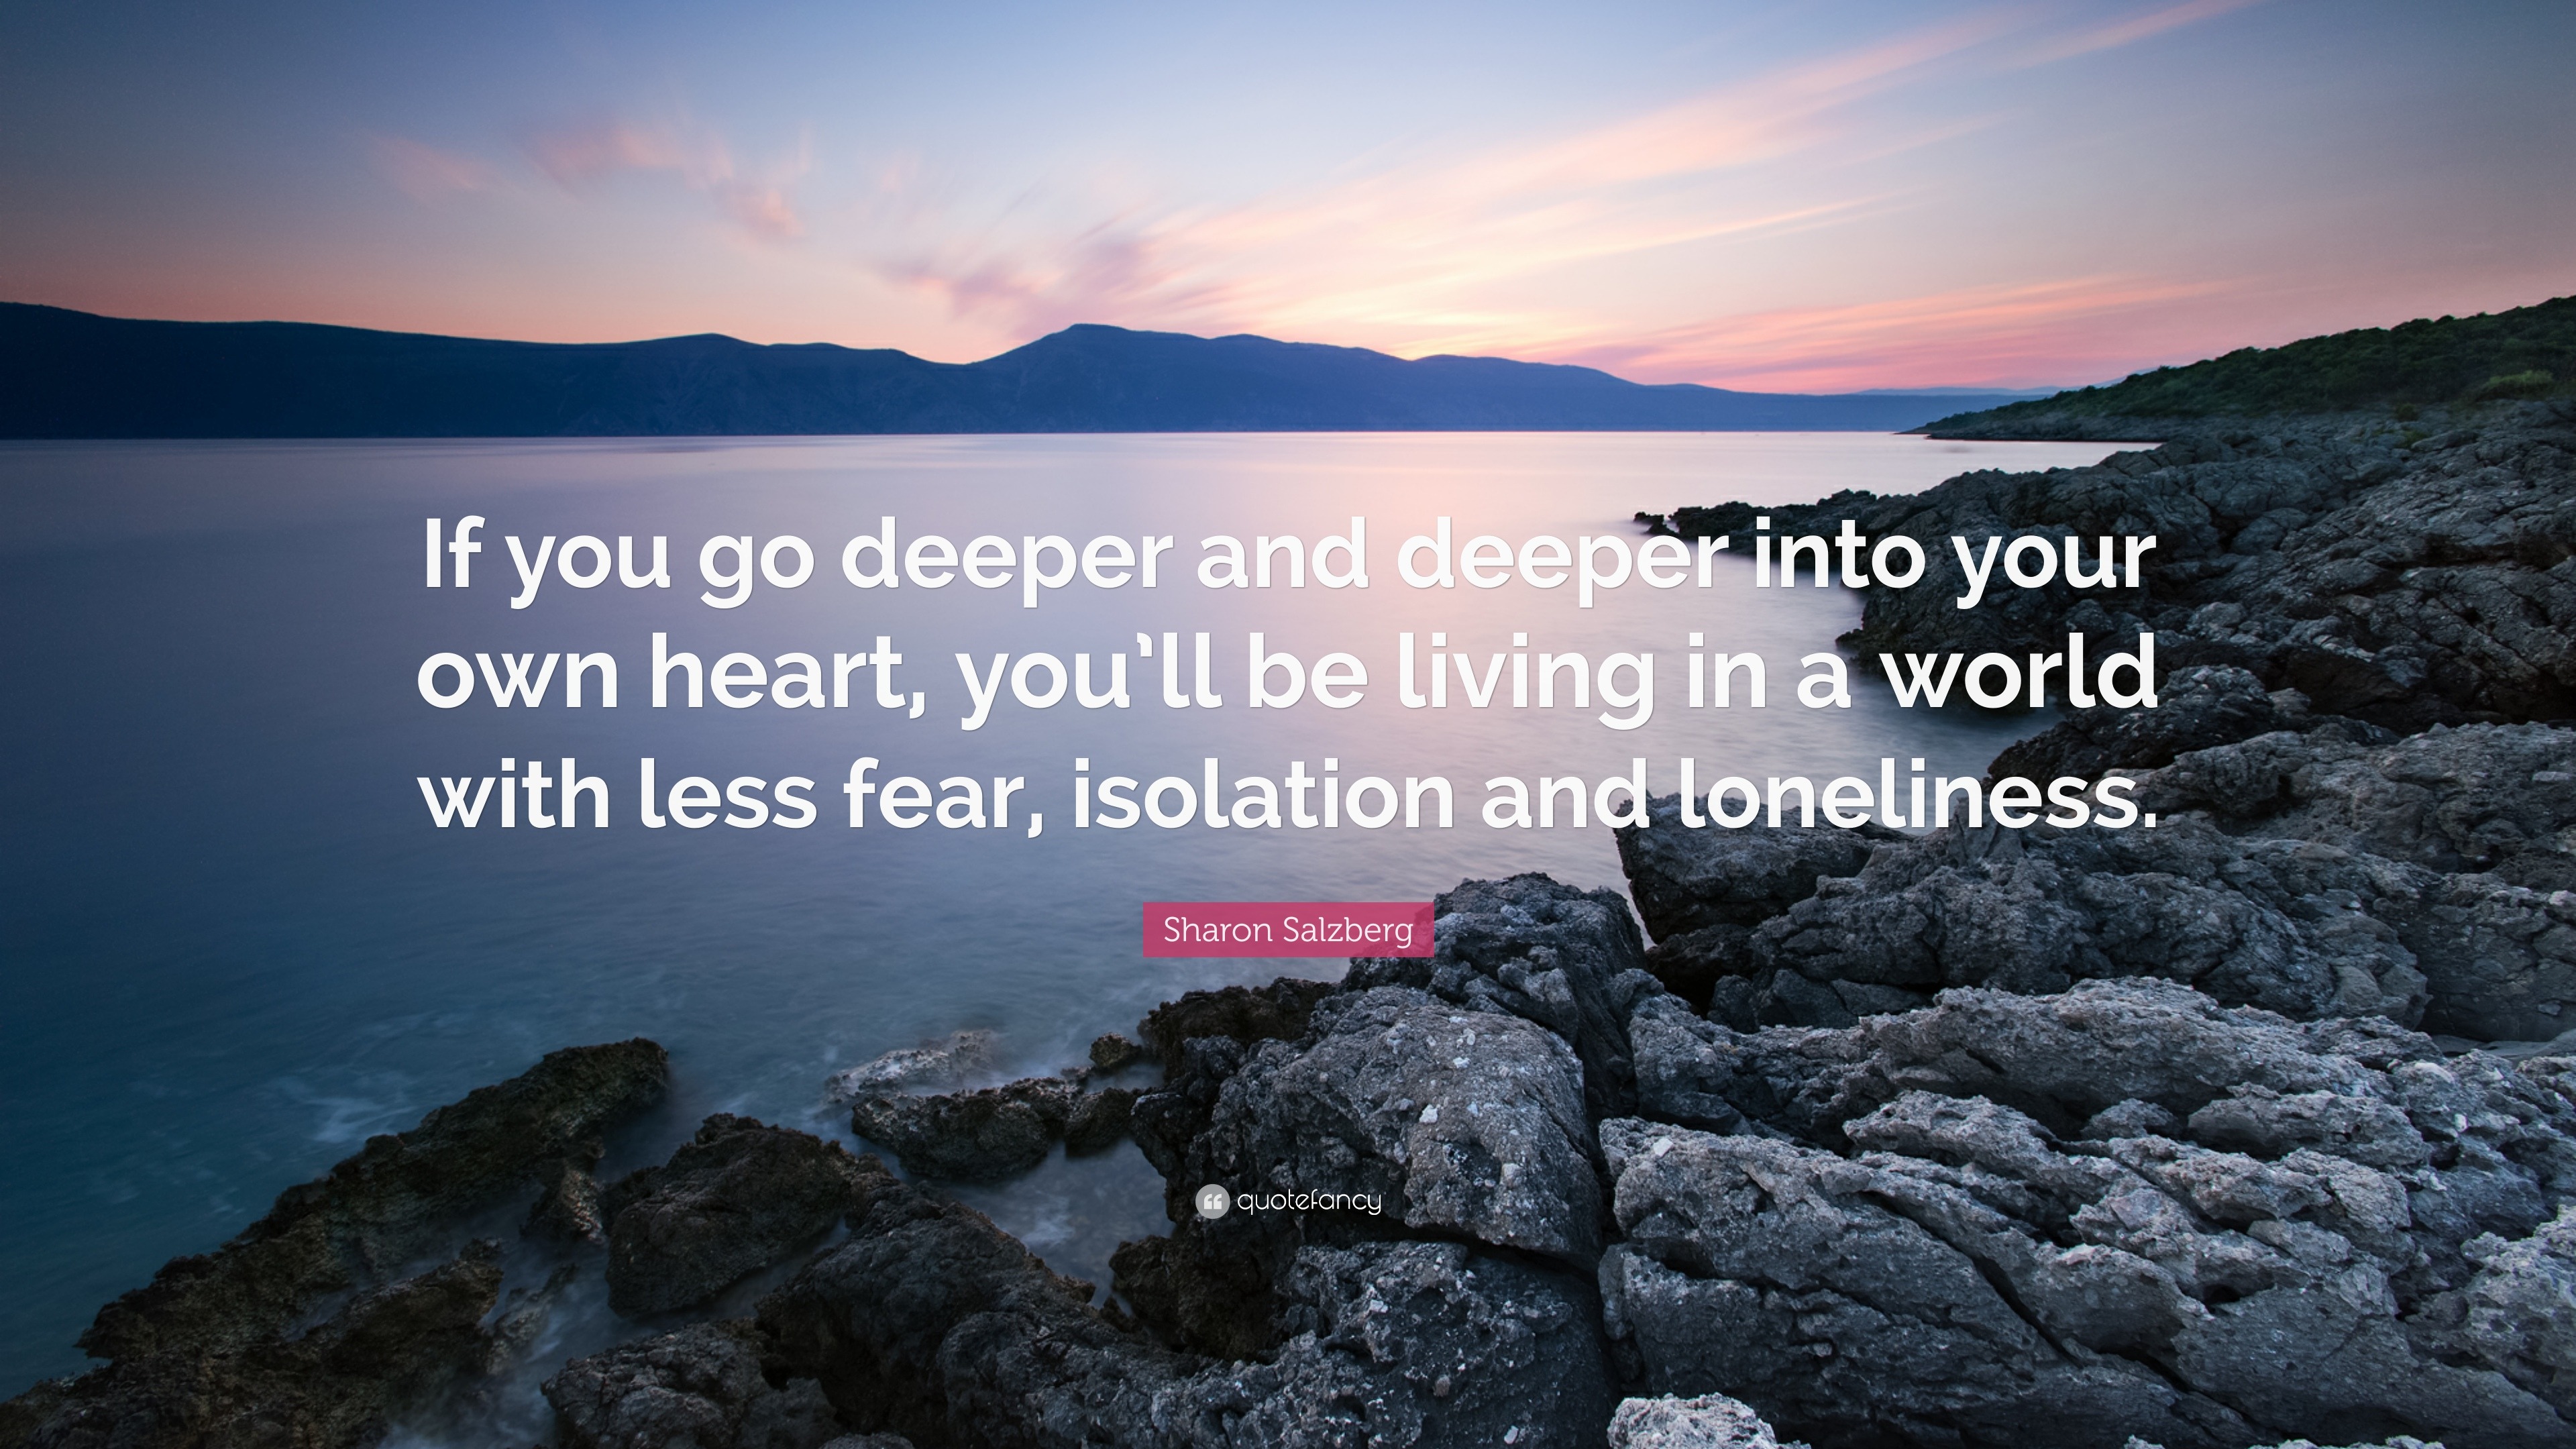 Sharon Salzberg Quote: “If you go deeper and deeper into your own heart ...